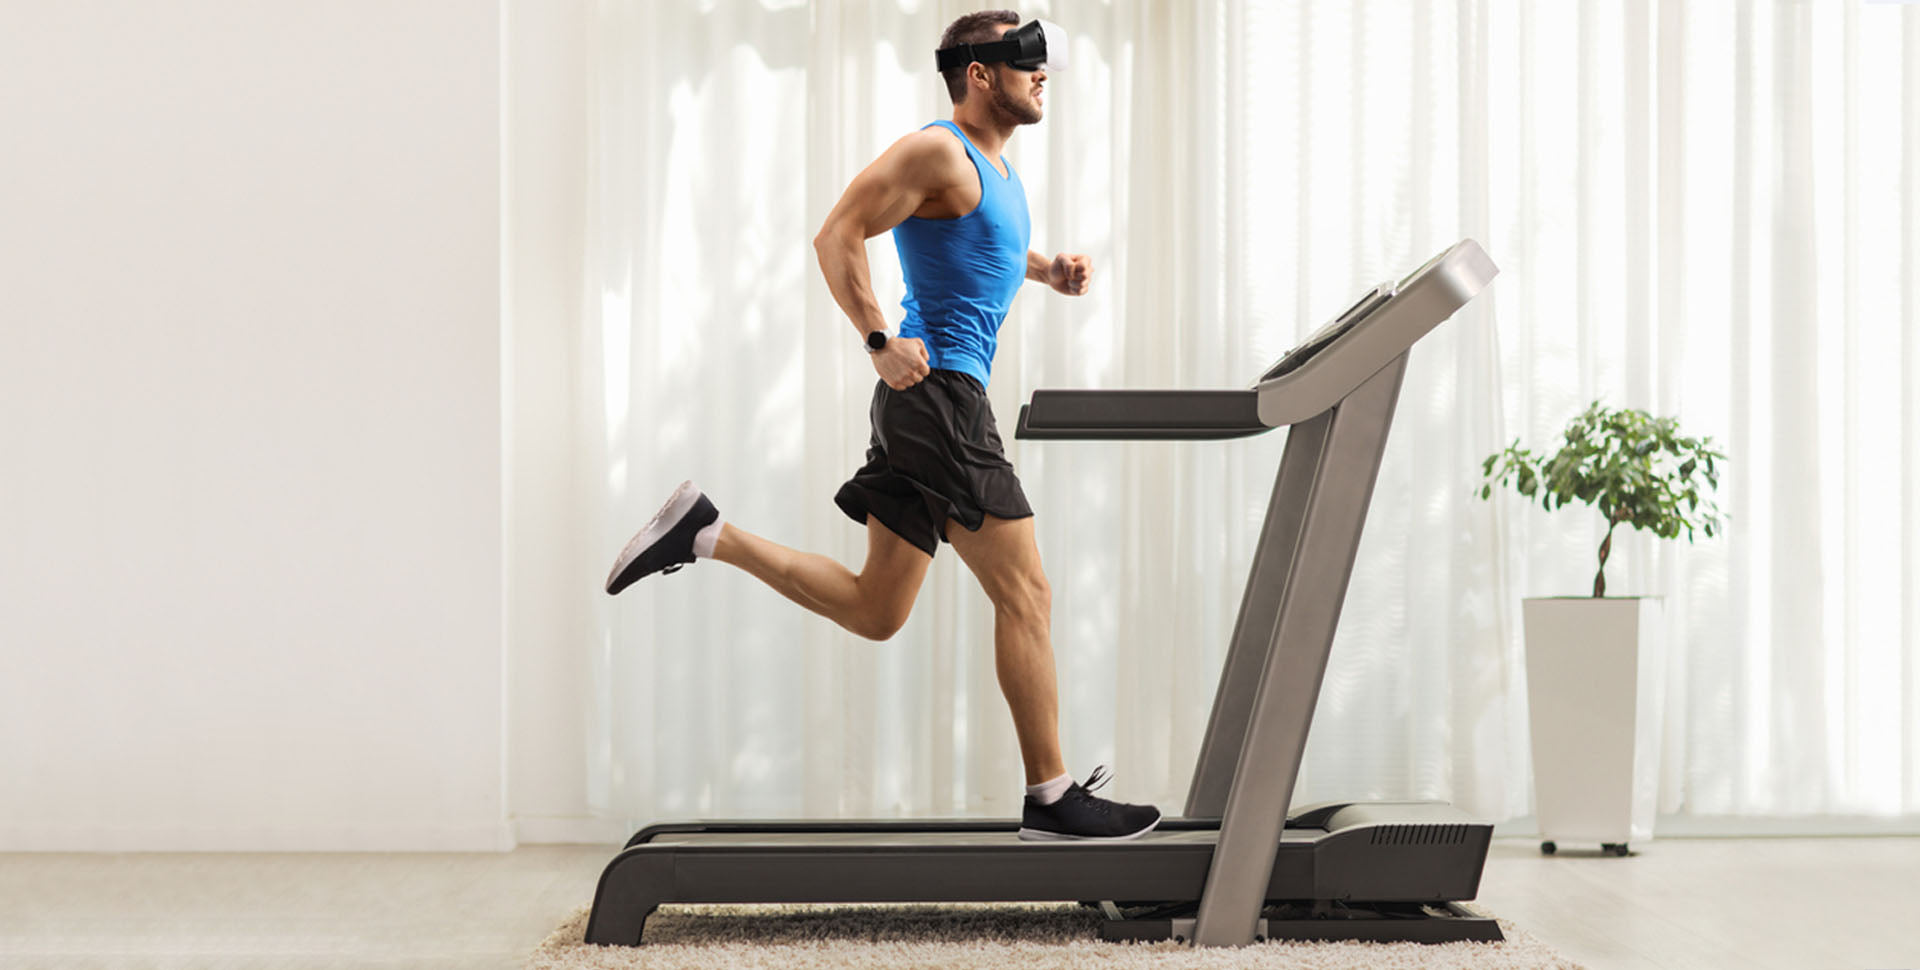 5 Running Interval Workouts to Build Fitness & Speed Quickly